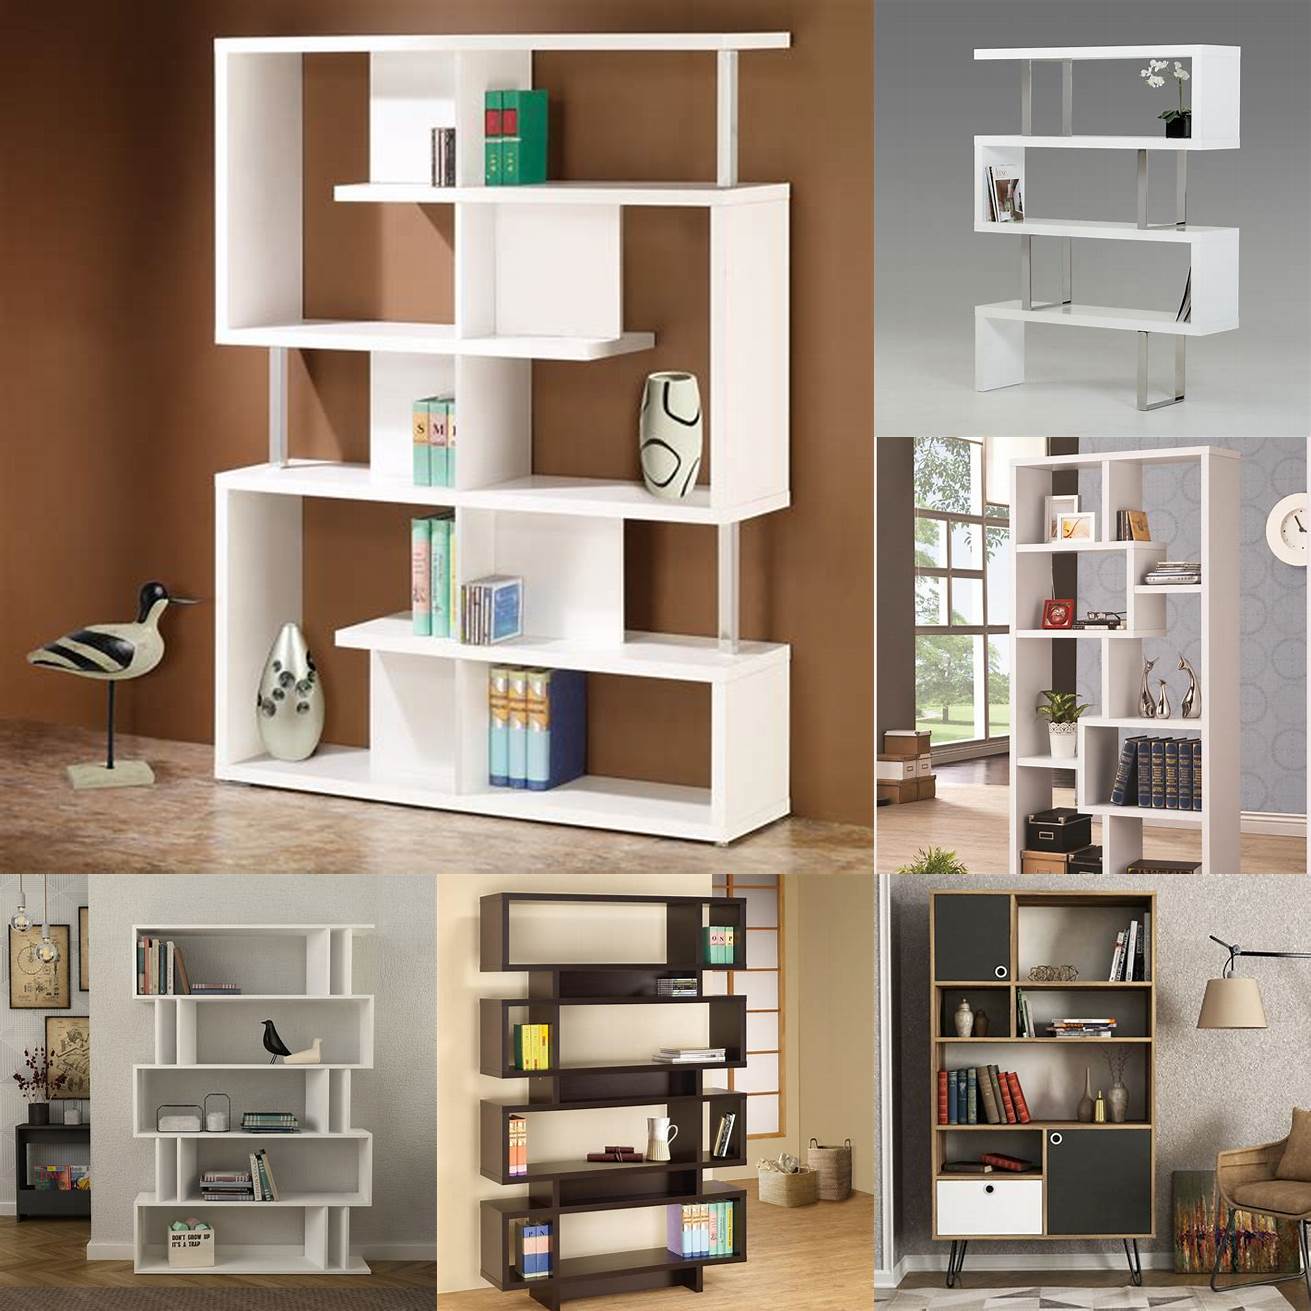 A bookcase with a modern finish